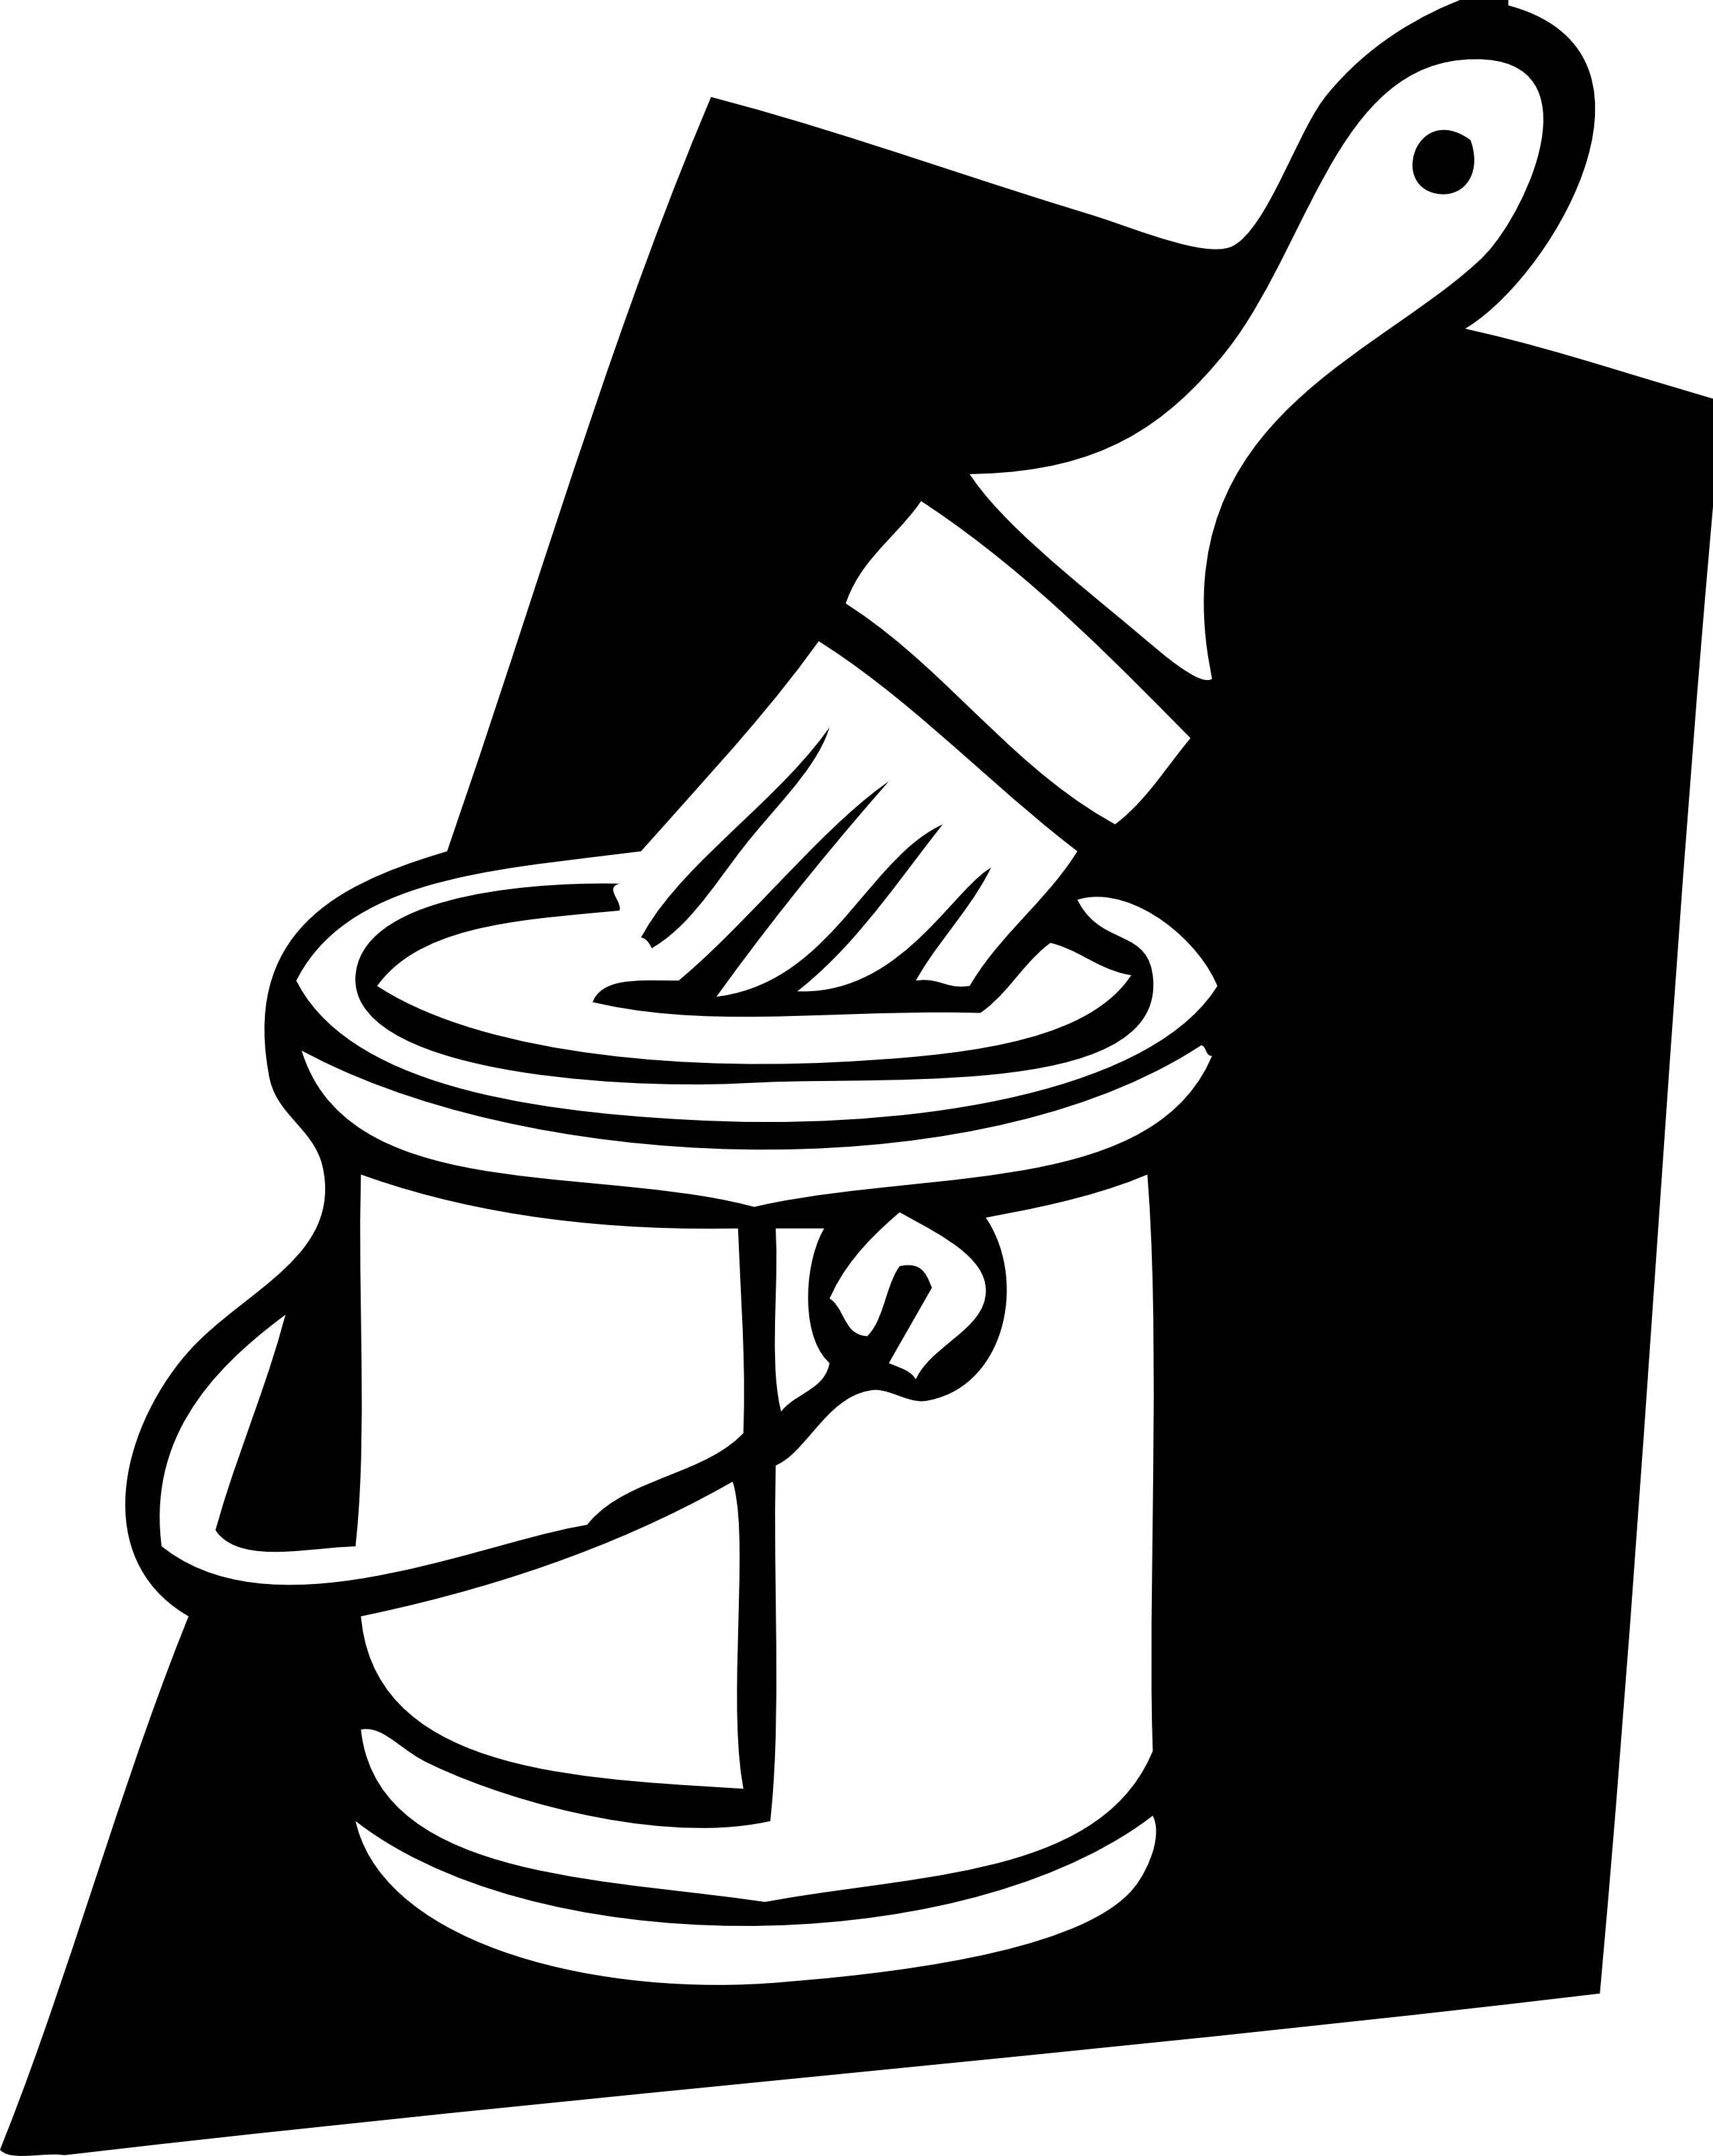 Pix For > Paint Can Clipart